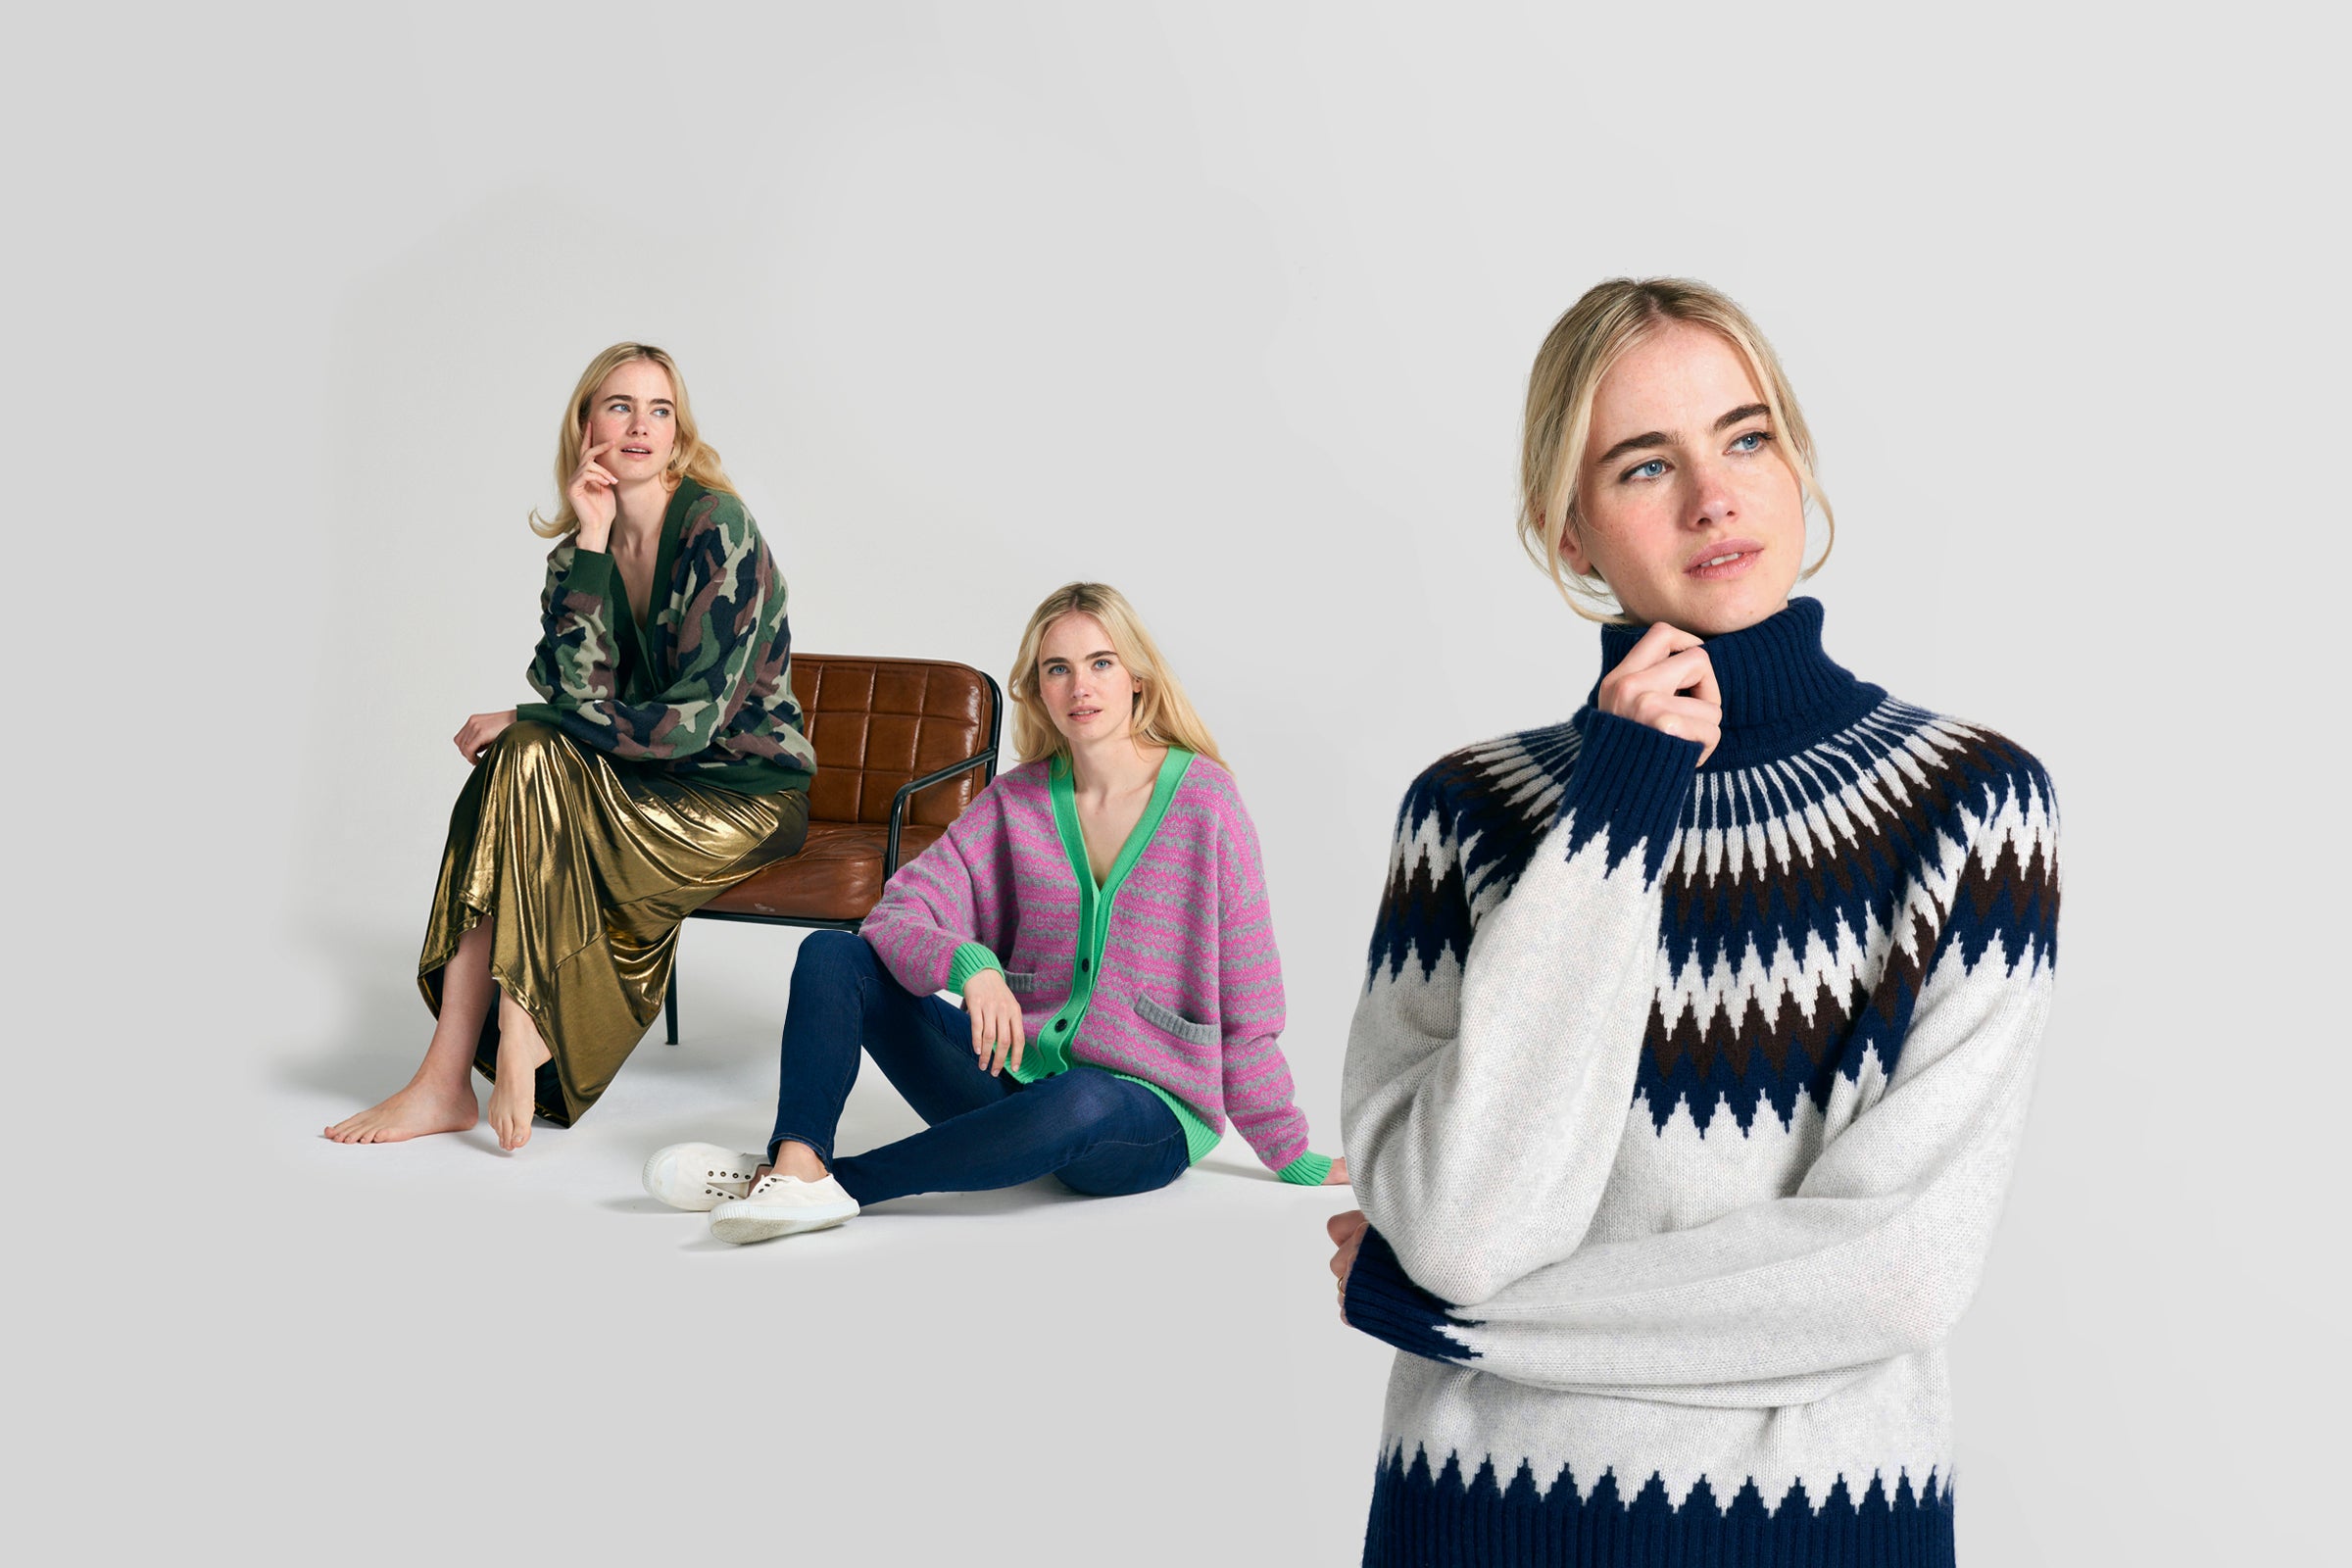 Model sitting in 3 poses in 3 Jumper 1234 Cashmere cardigans and matching outfits